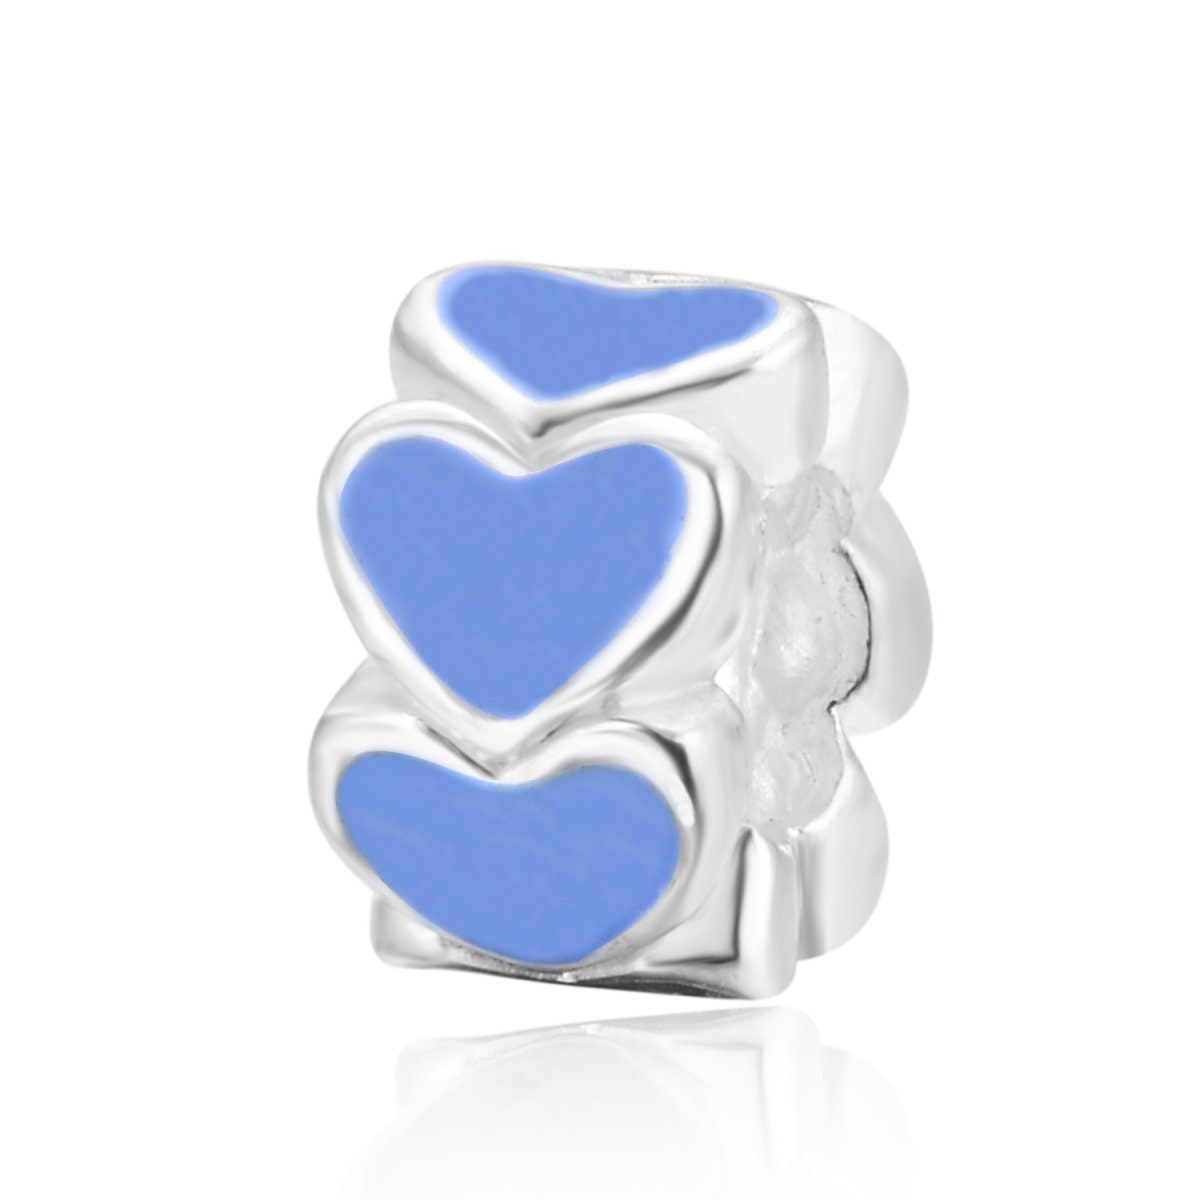 Authentic Sterling Silver Endless Love Heart Charm Bead